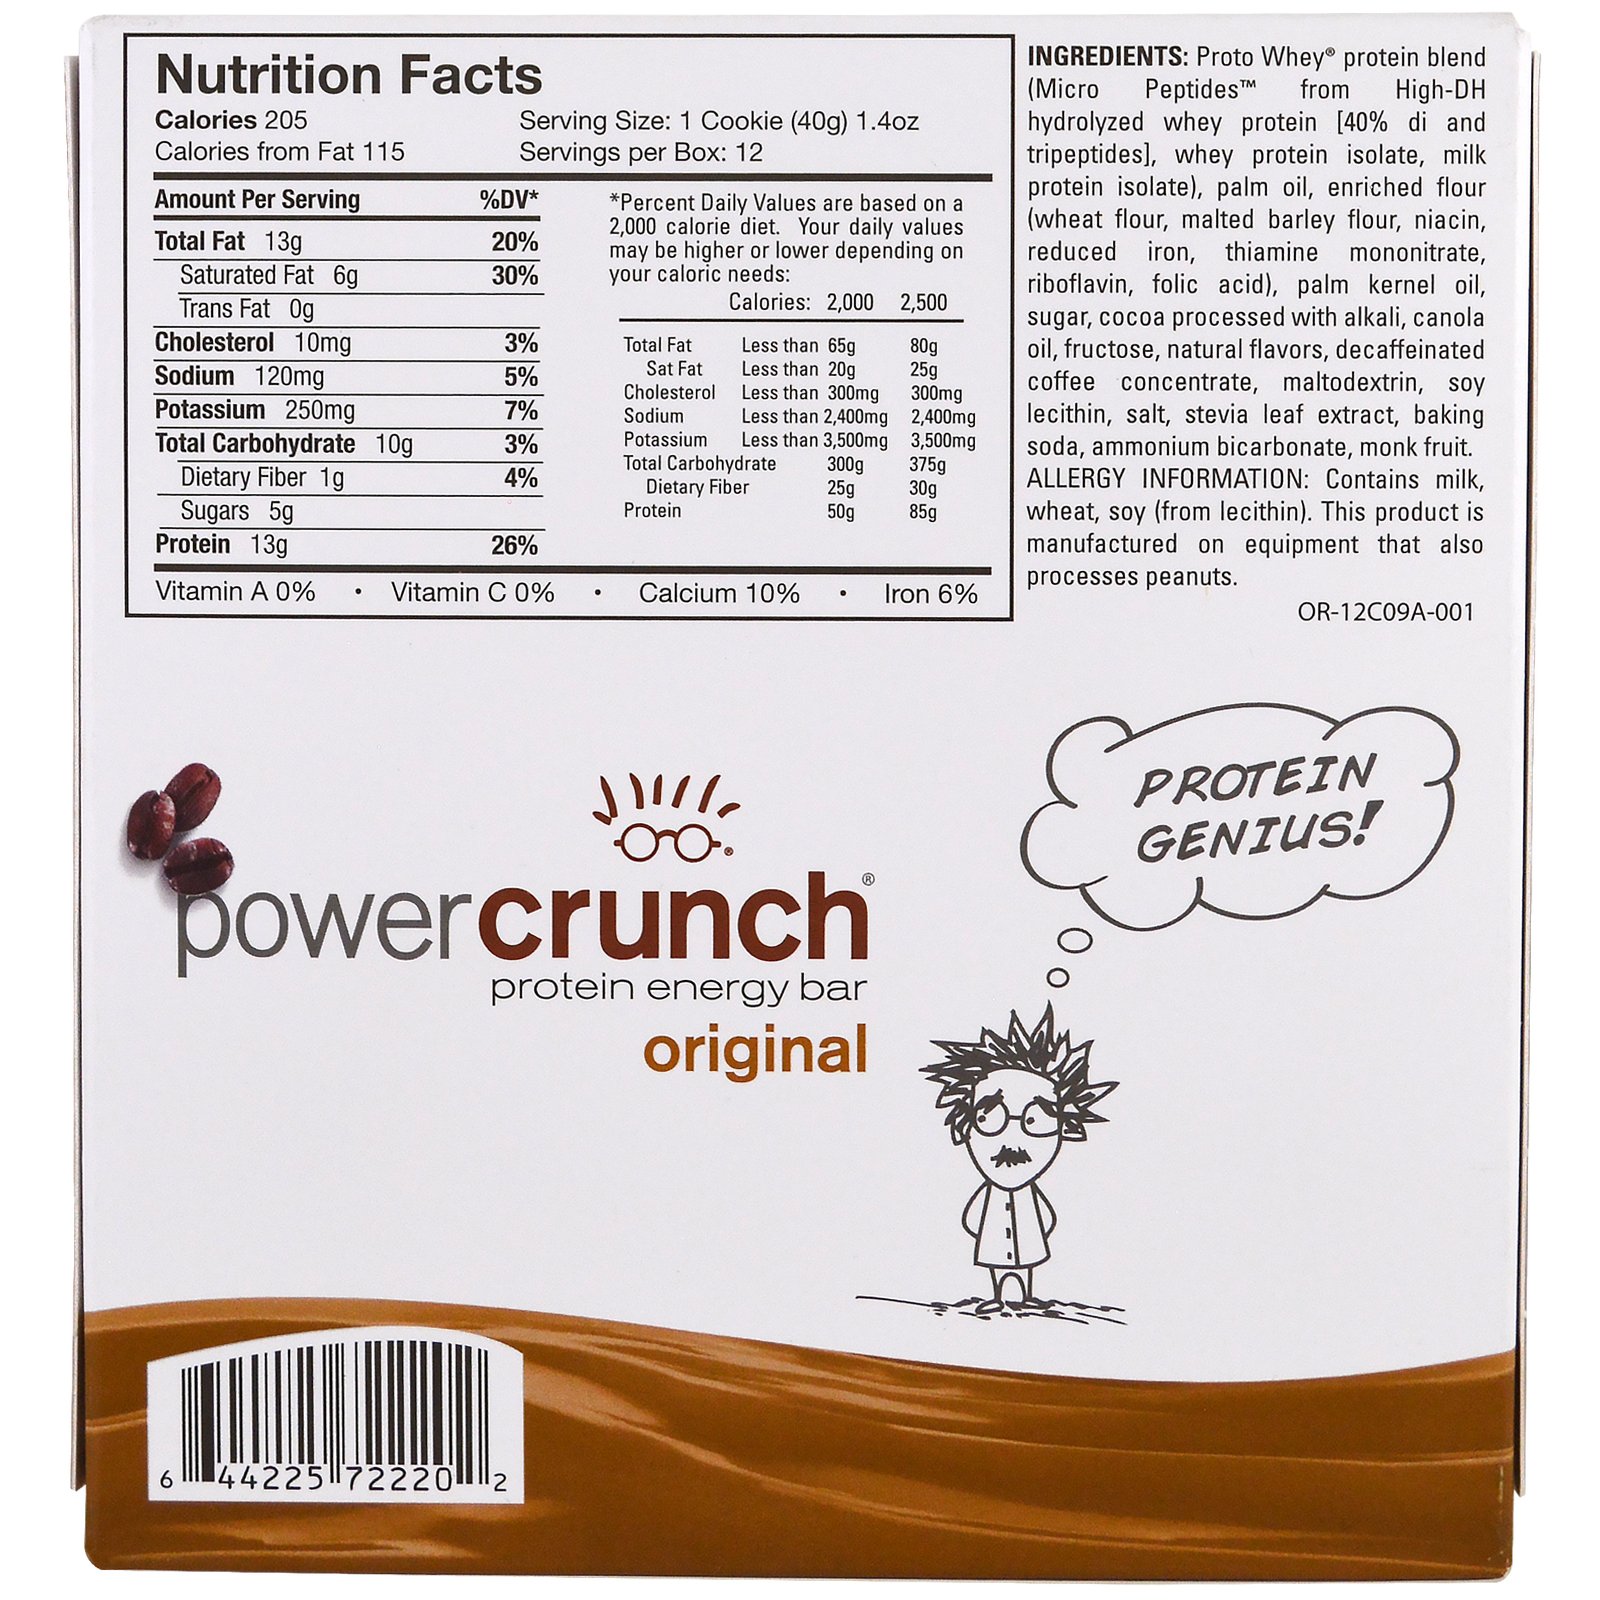 fit crunch protein bars nutrition